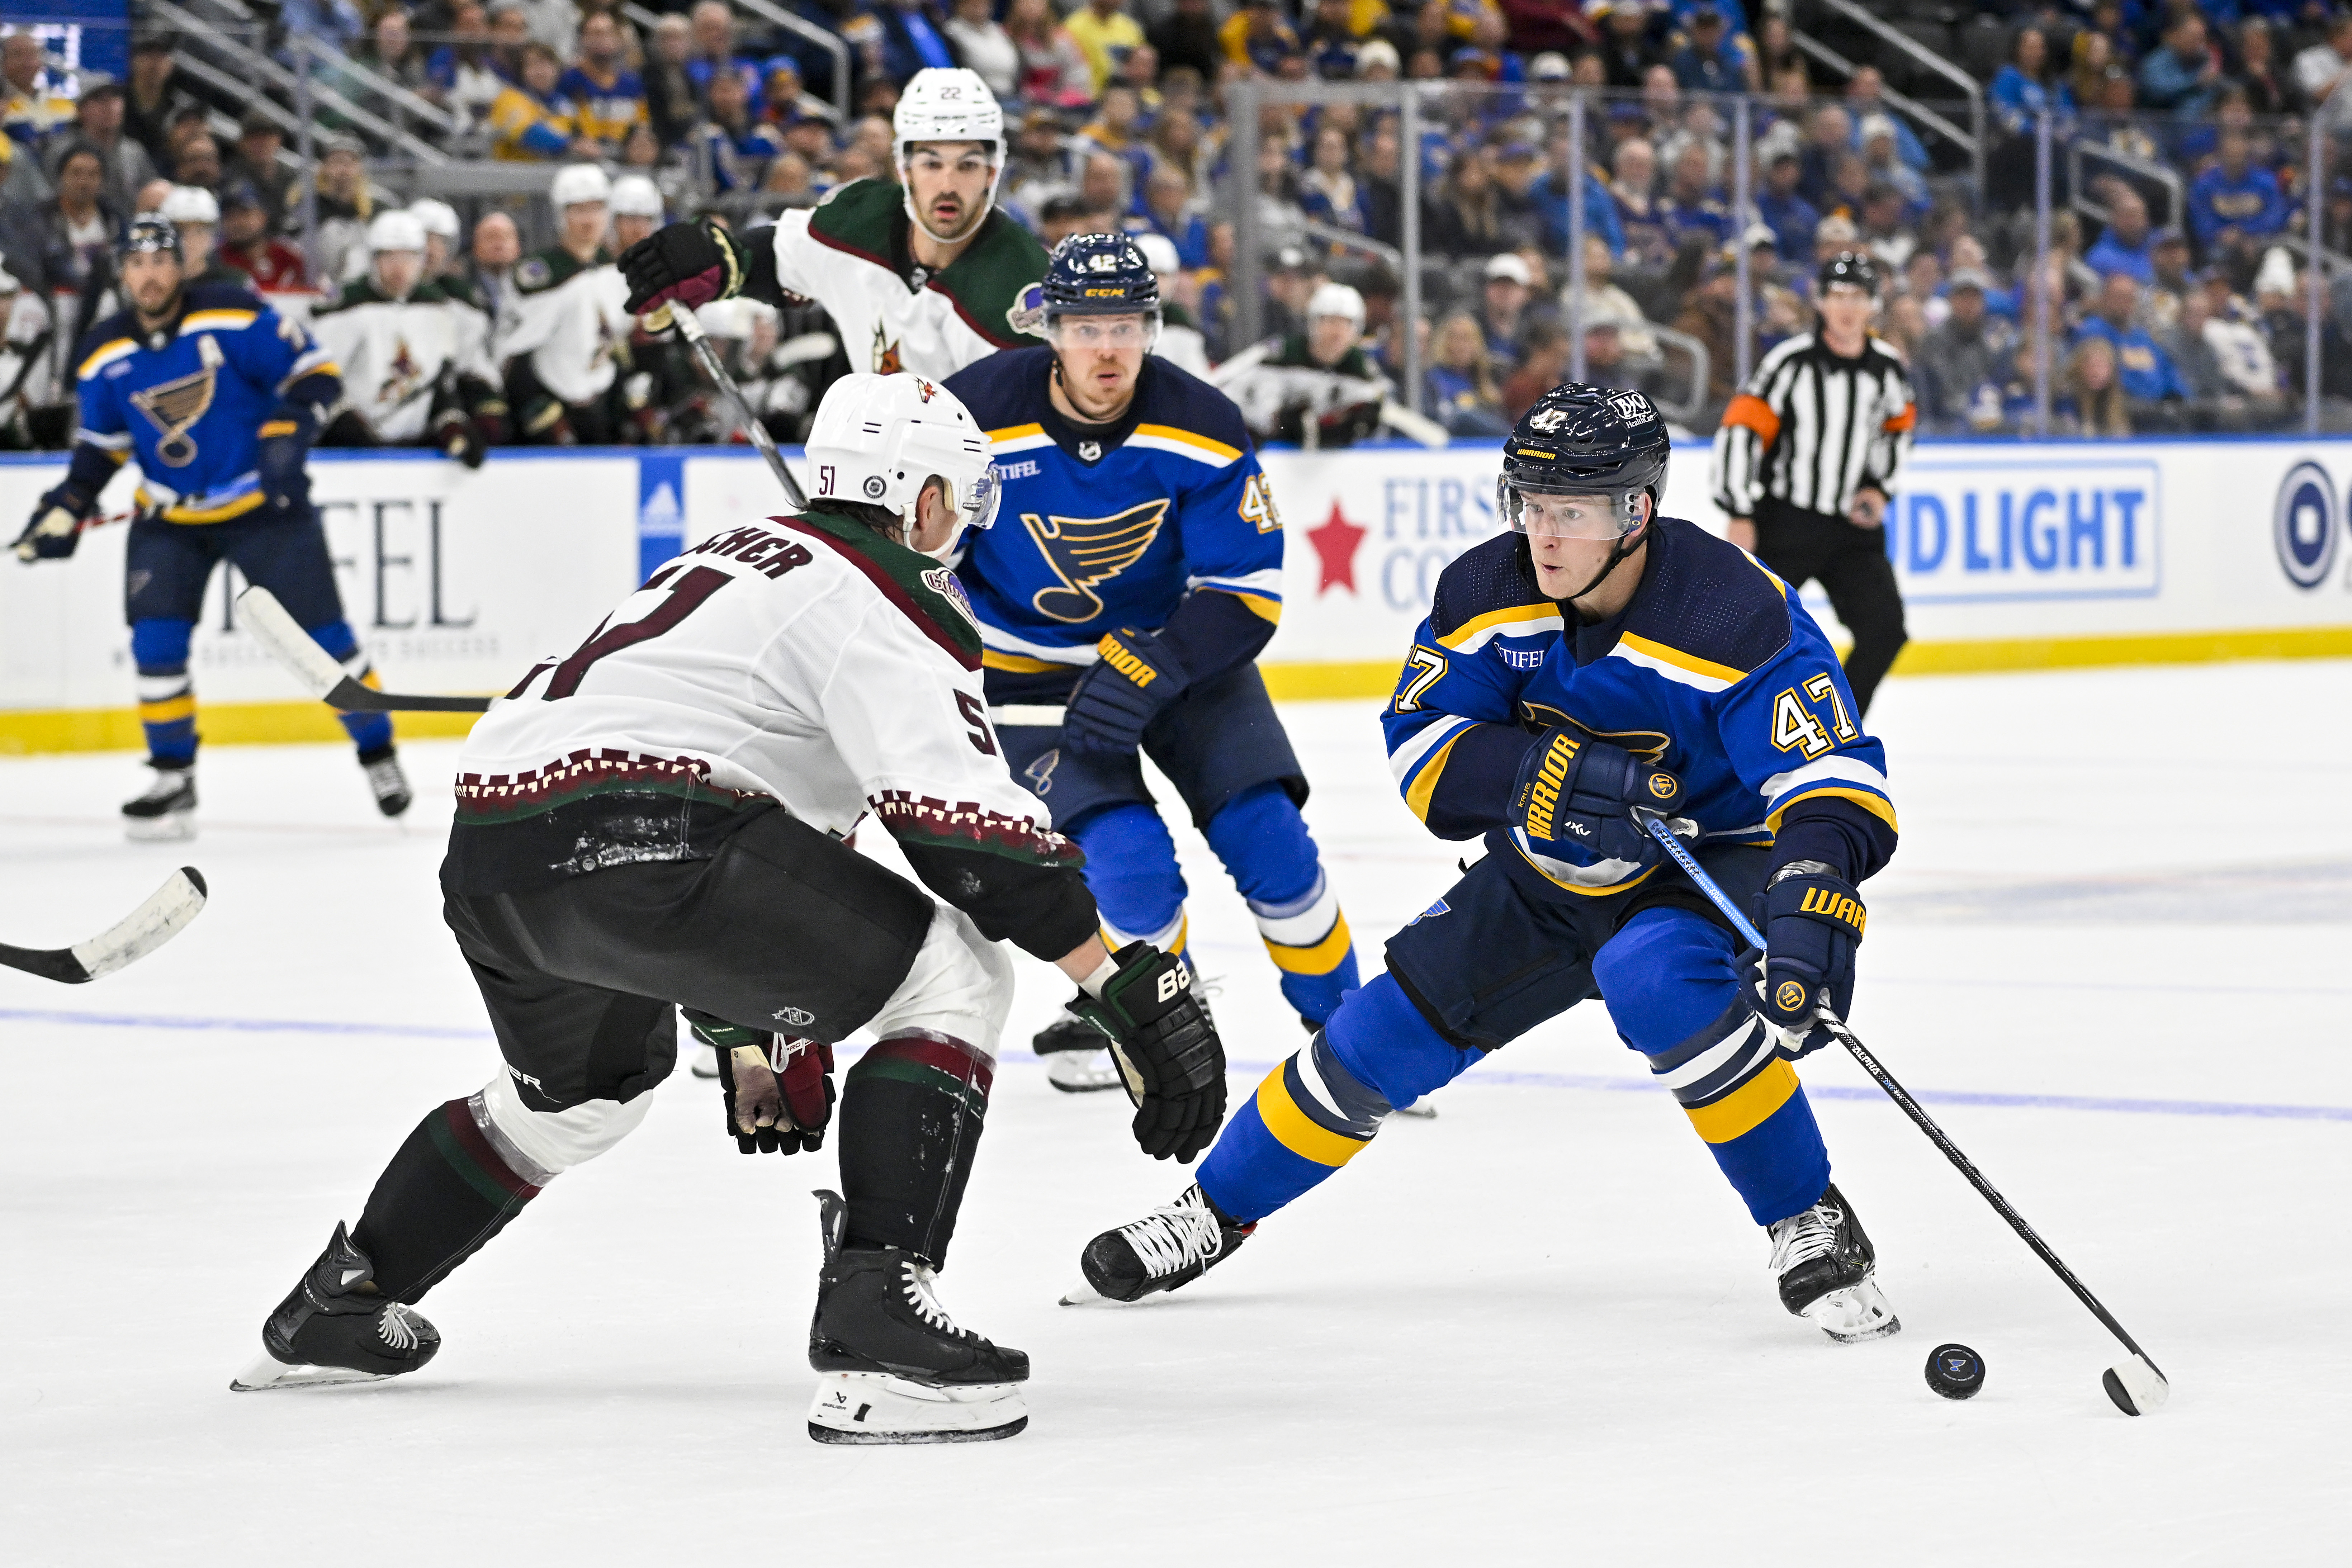 Clayton Keller helps Coyotes roll past Blues